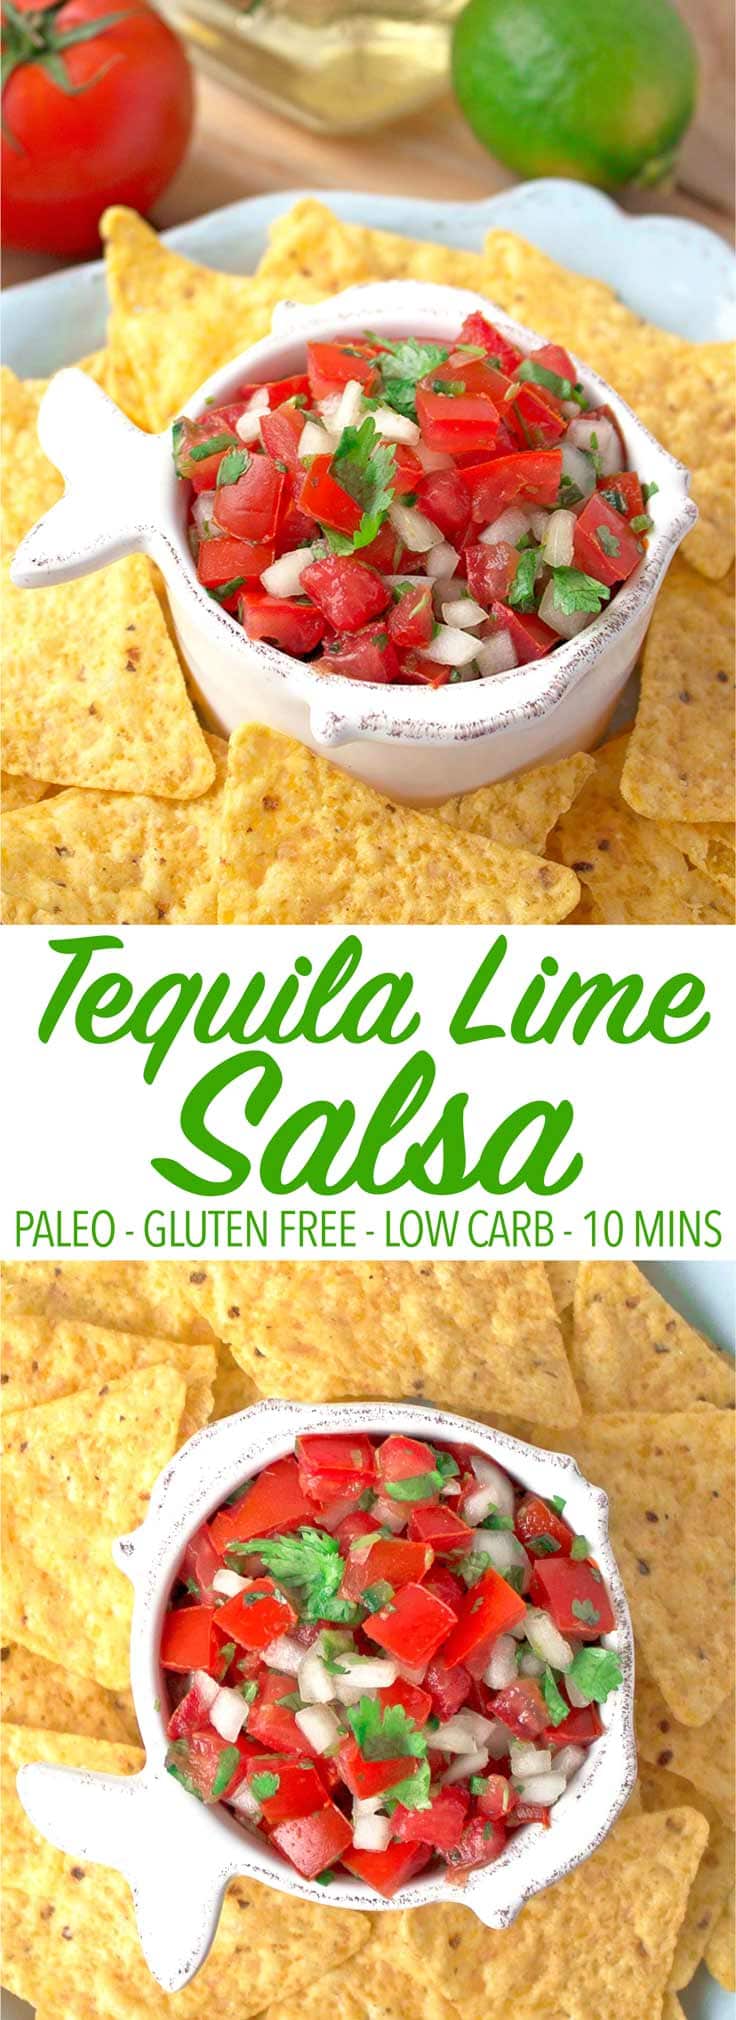 Easy to make and spiked with tequila! This delicious salsa is a fun spin on classic pico de gallo. It's paleo, low carb, keto, and gluten free!